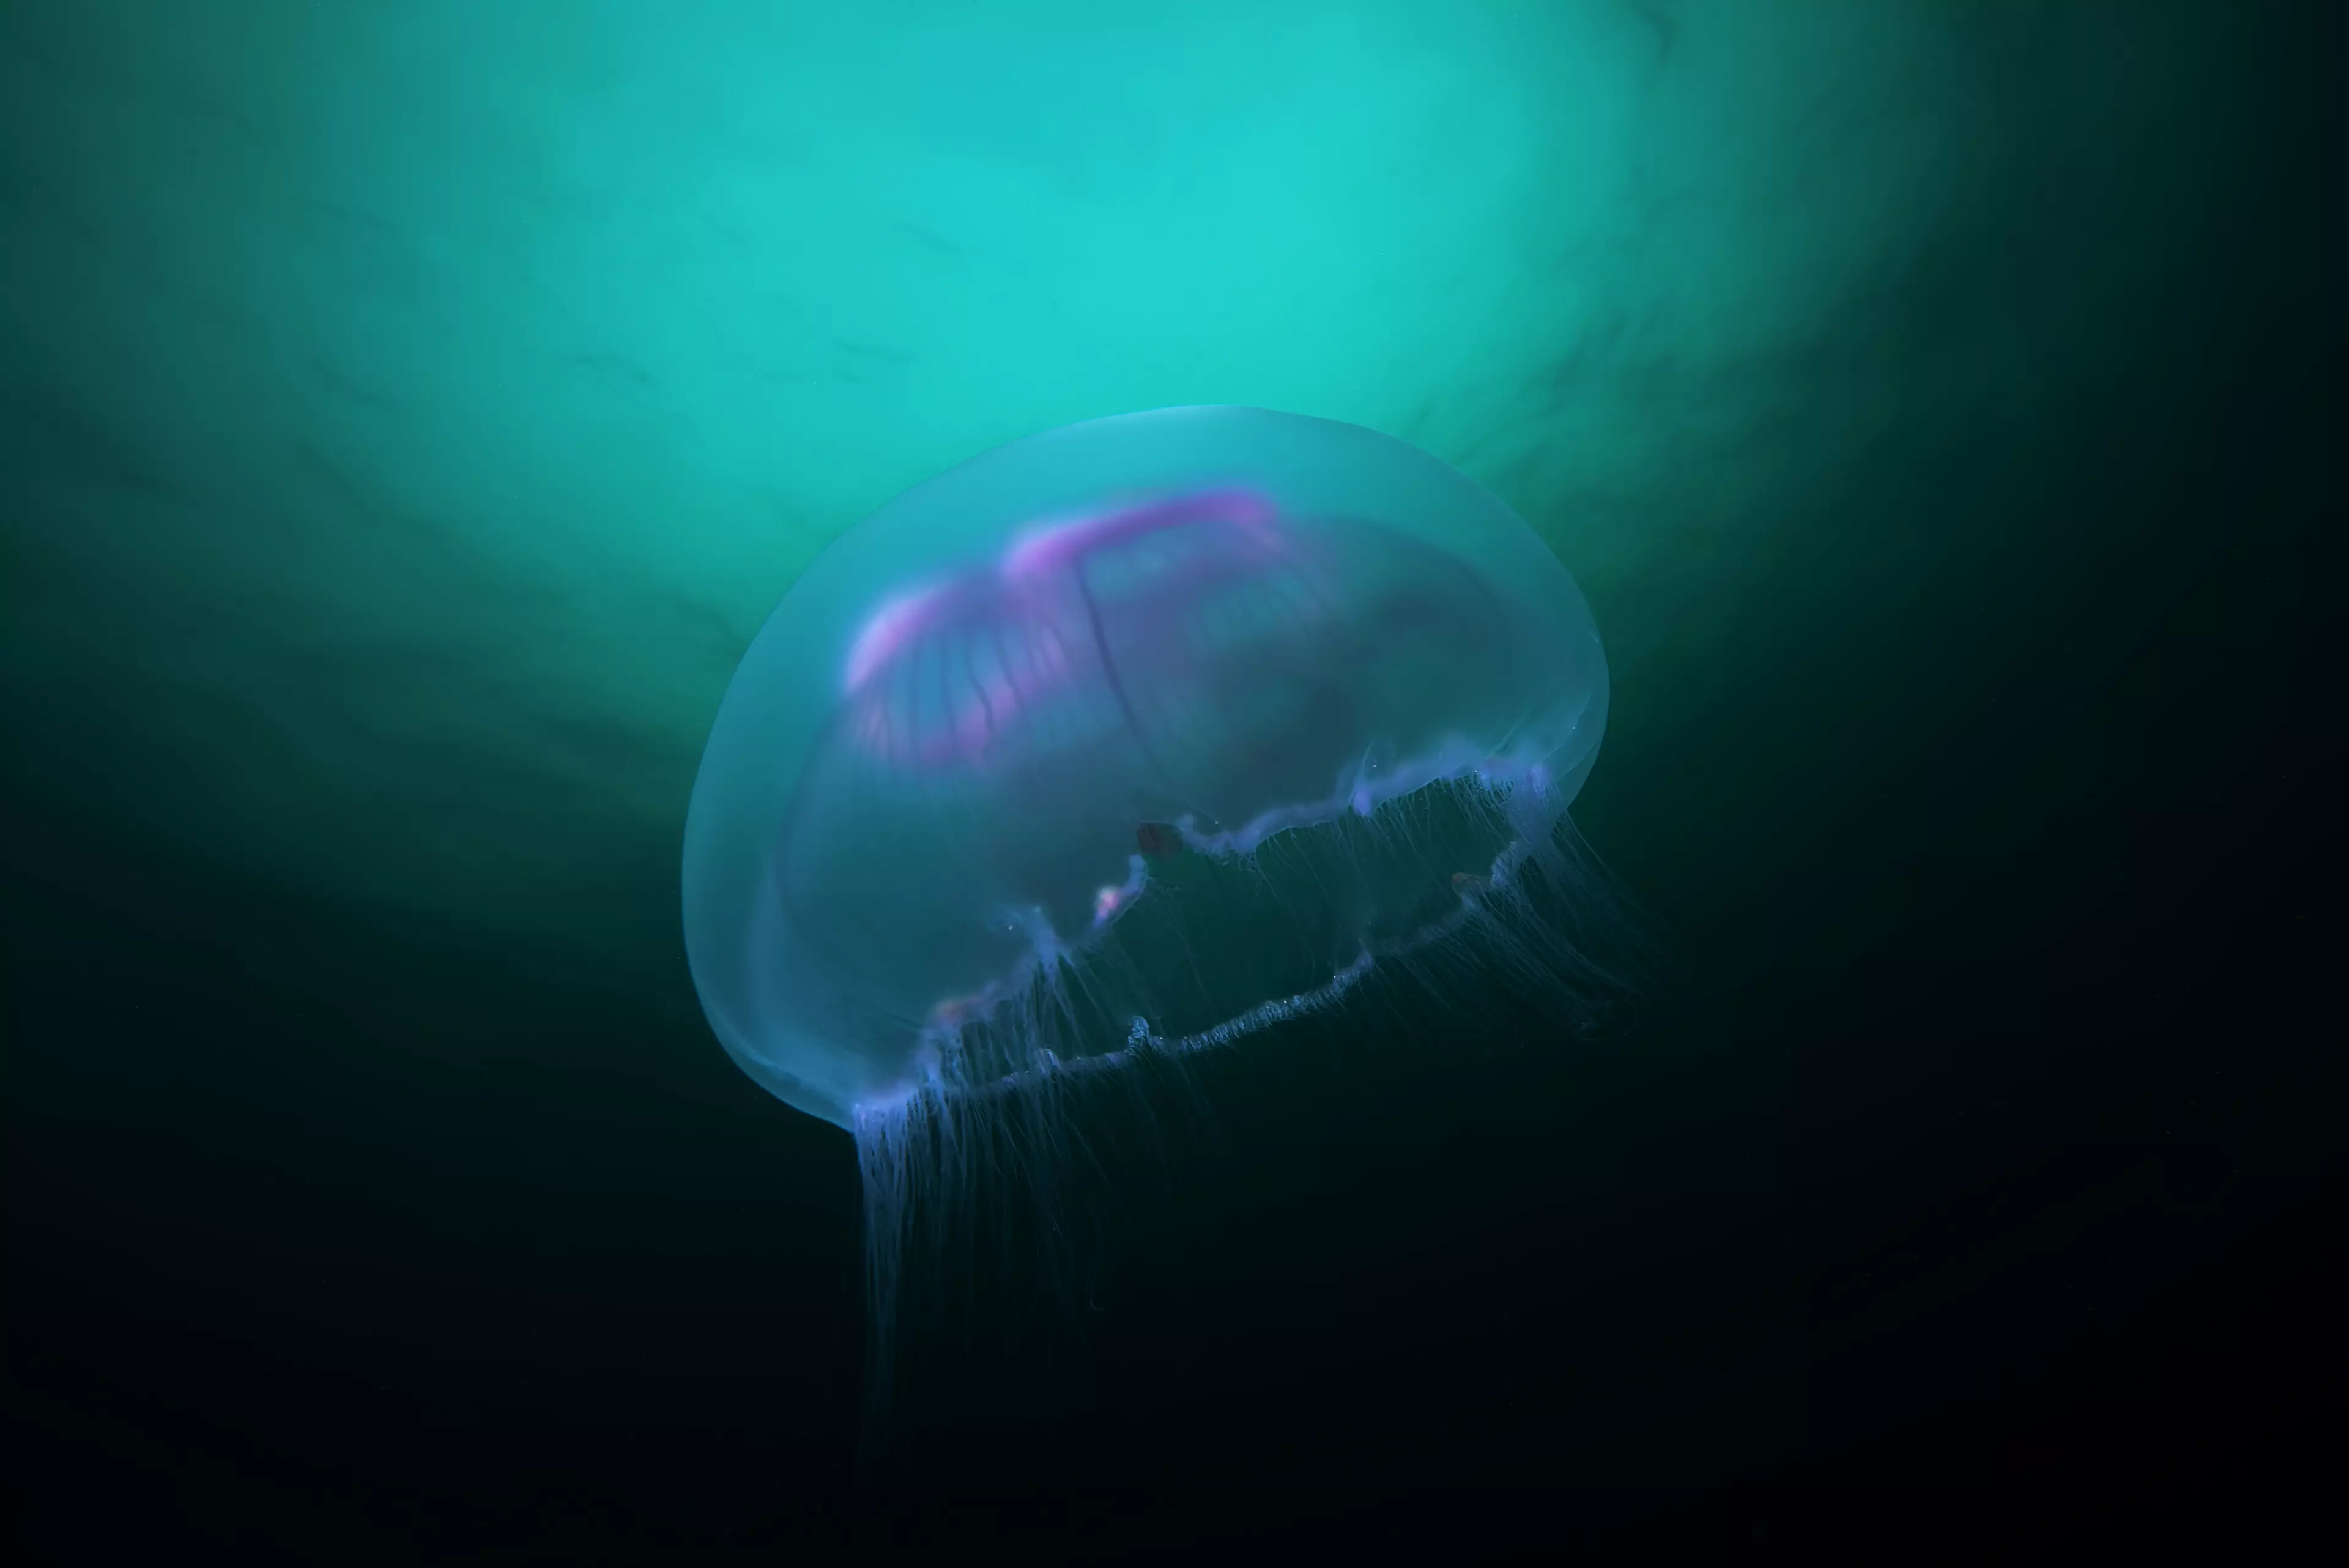 Moon jellyfish are the most common.